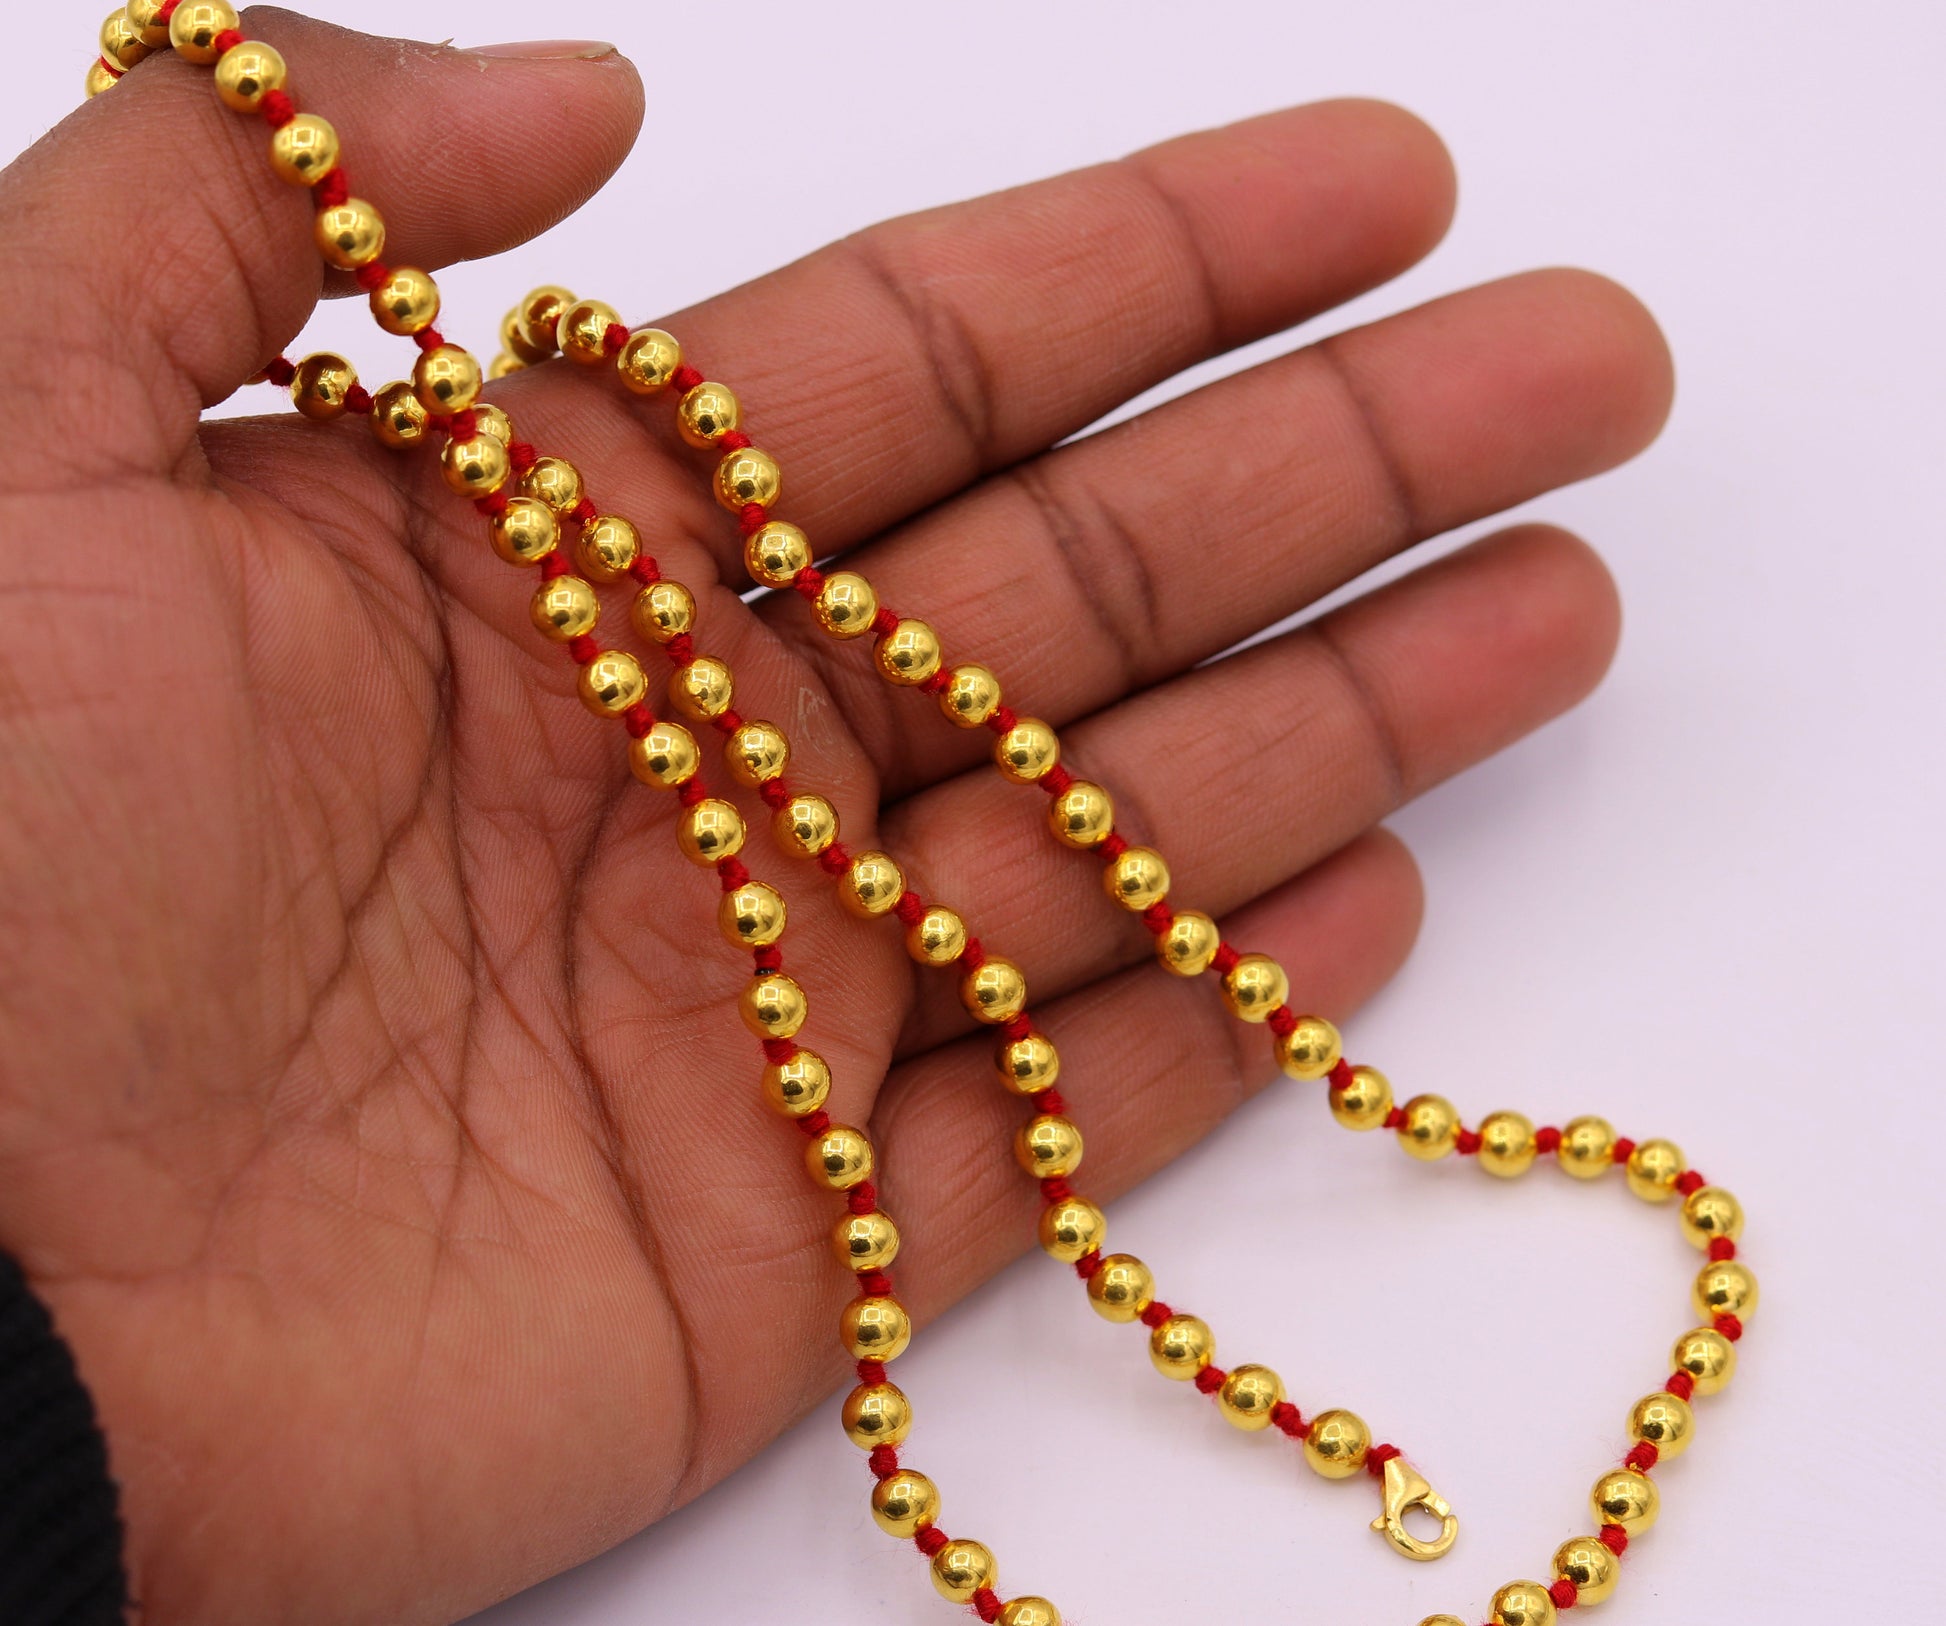 Vintage antique design handmade gold 20kt yellow gold ball beads necklace chain fabulous indian tribal jewelry from india - TRIBAL ORNAMENTS